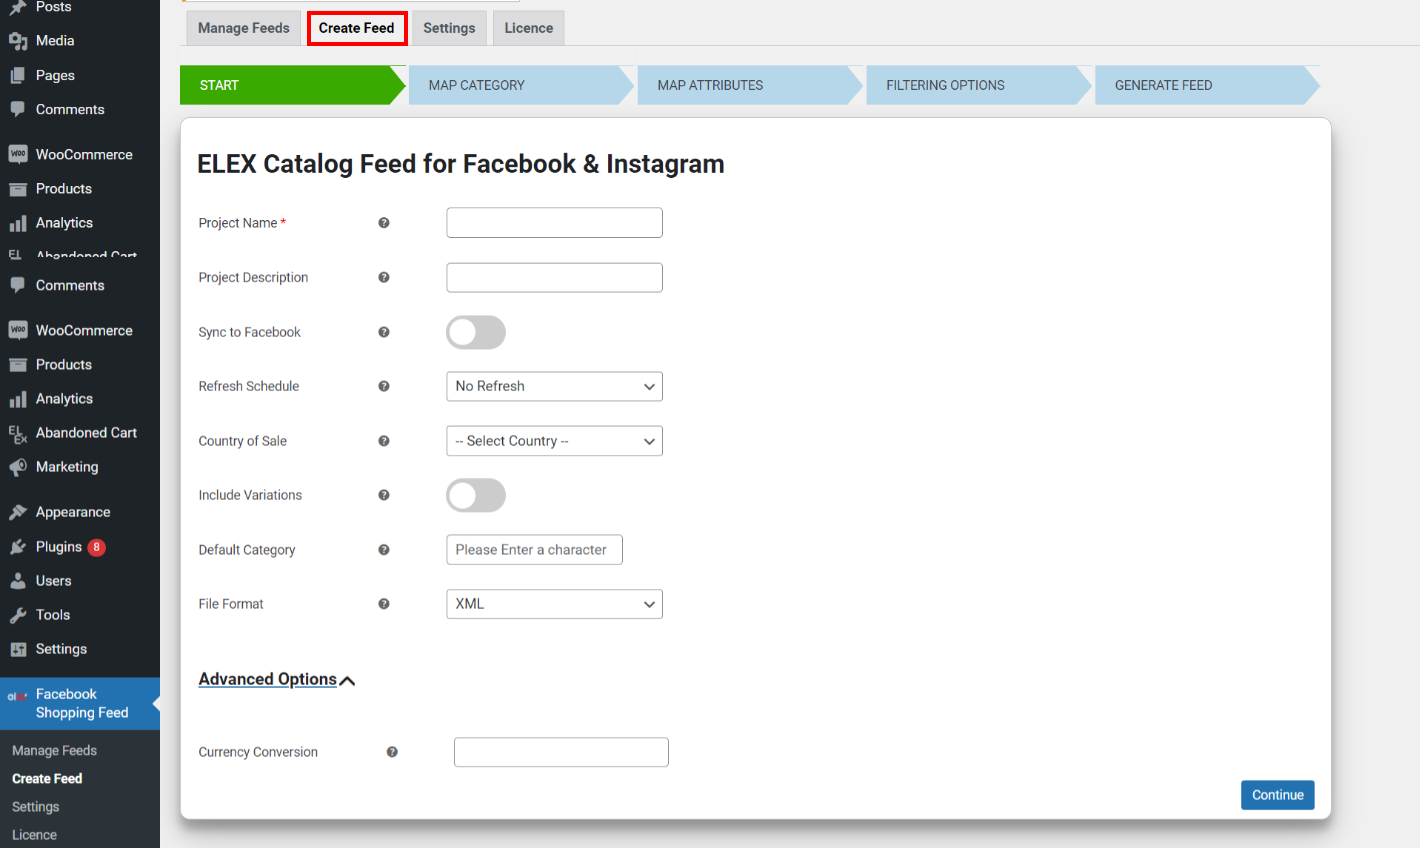 How to Correctly Map Product Attributes While Creating Catalog Feeds for Facebook & Instagram? (Mandatory Fields)